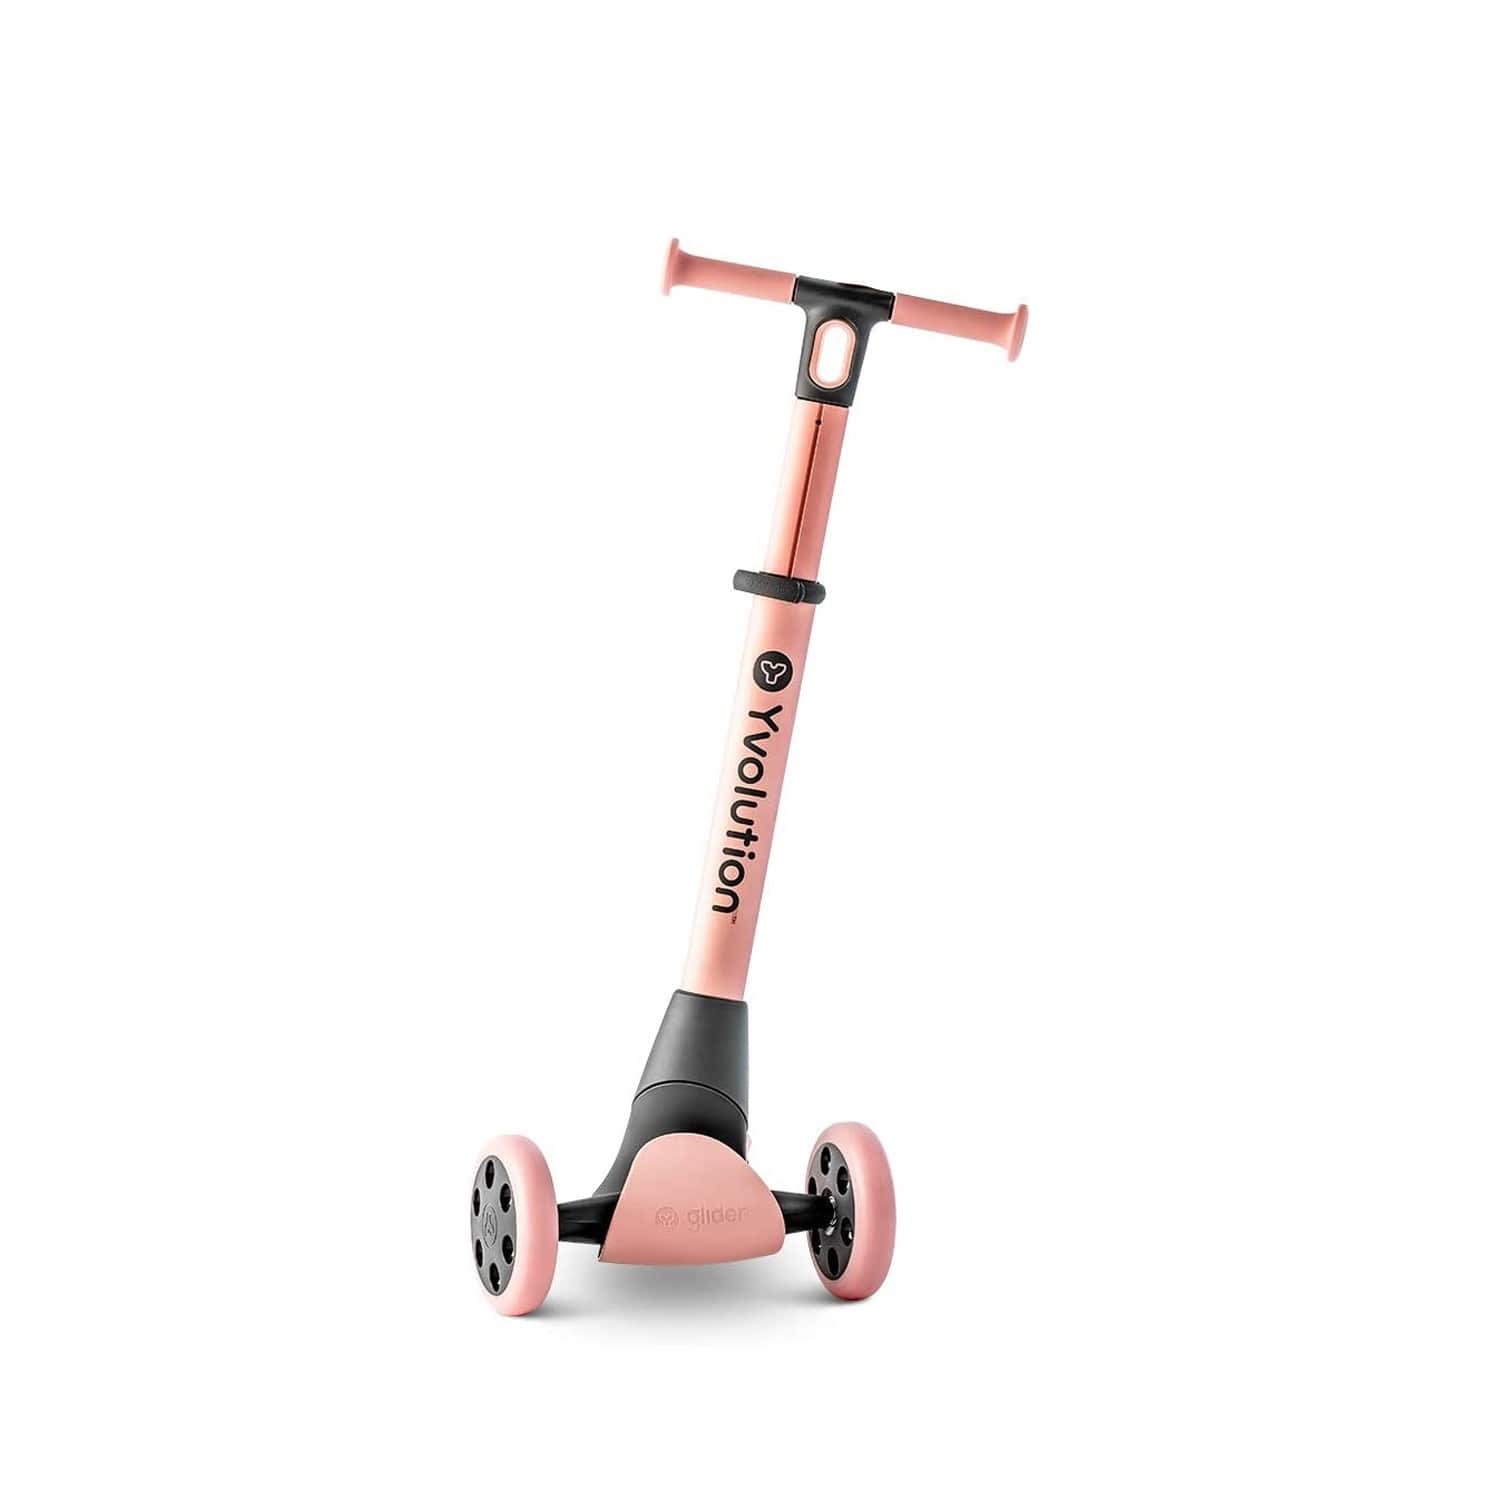 Yvolution Y Glider Nua Scooter - Pink